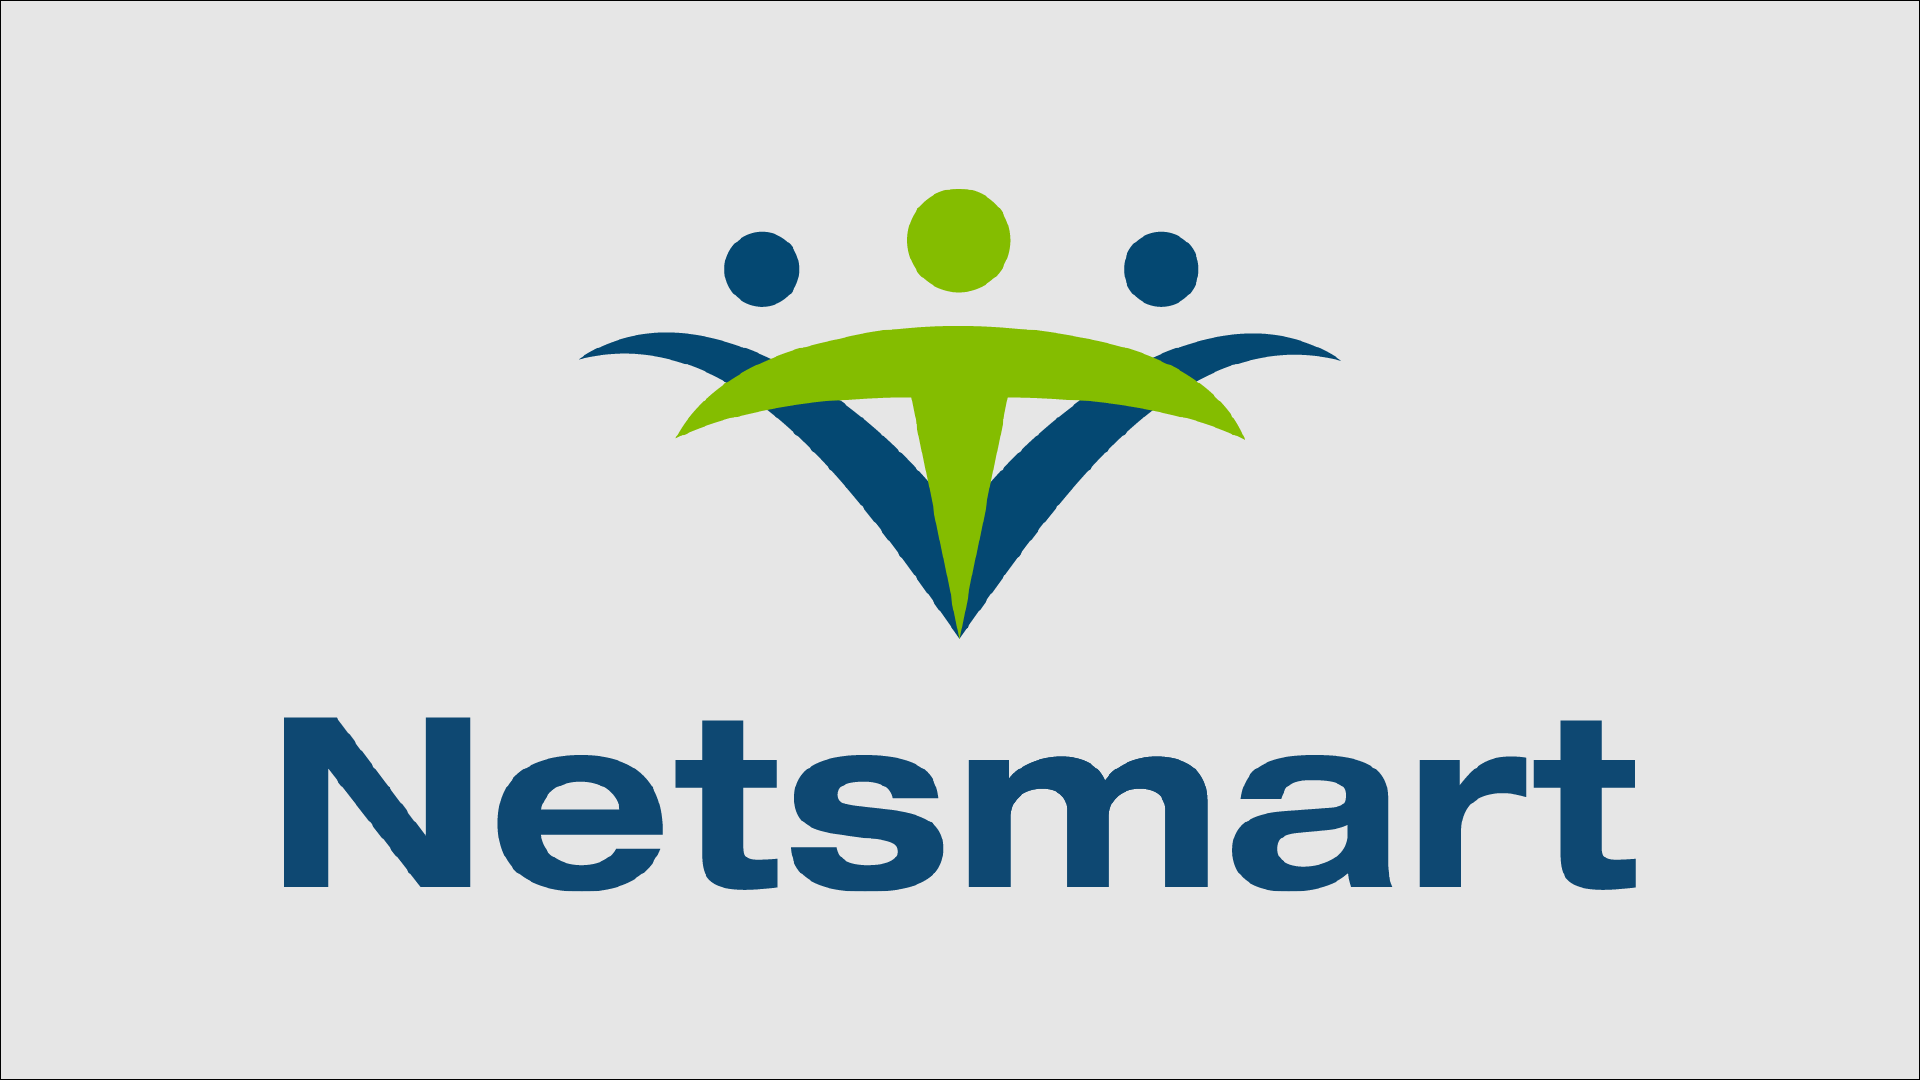 Netsmart logo. in a symbol of the word that resembles three stick figure like people.